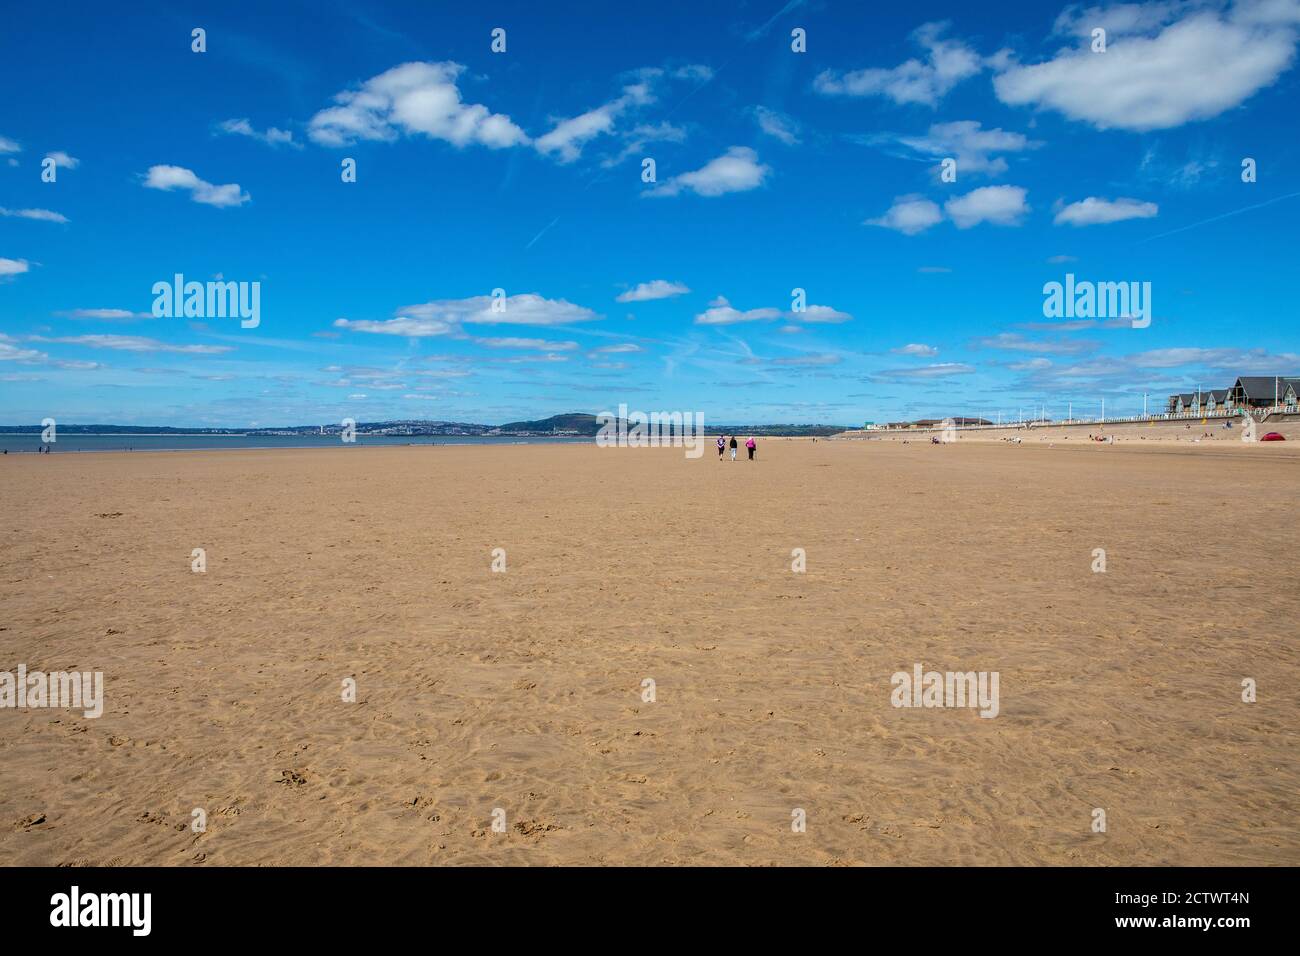 A view of the beautiful Aberavon Beach, also known as Aberavon Sands in South Wales, UK - looking towards Swansea Bay.  It is one of the longest beach Stock Photo